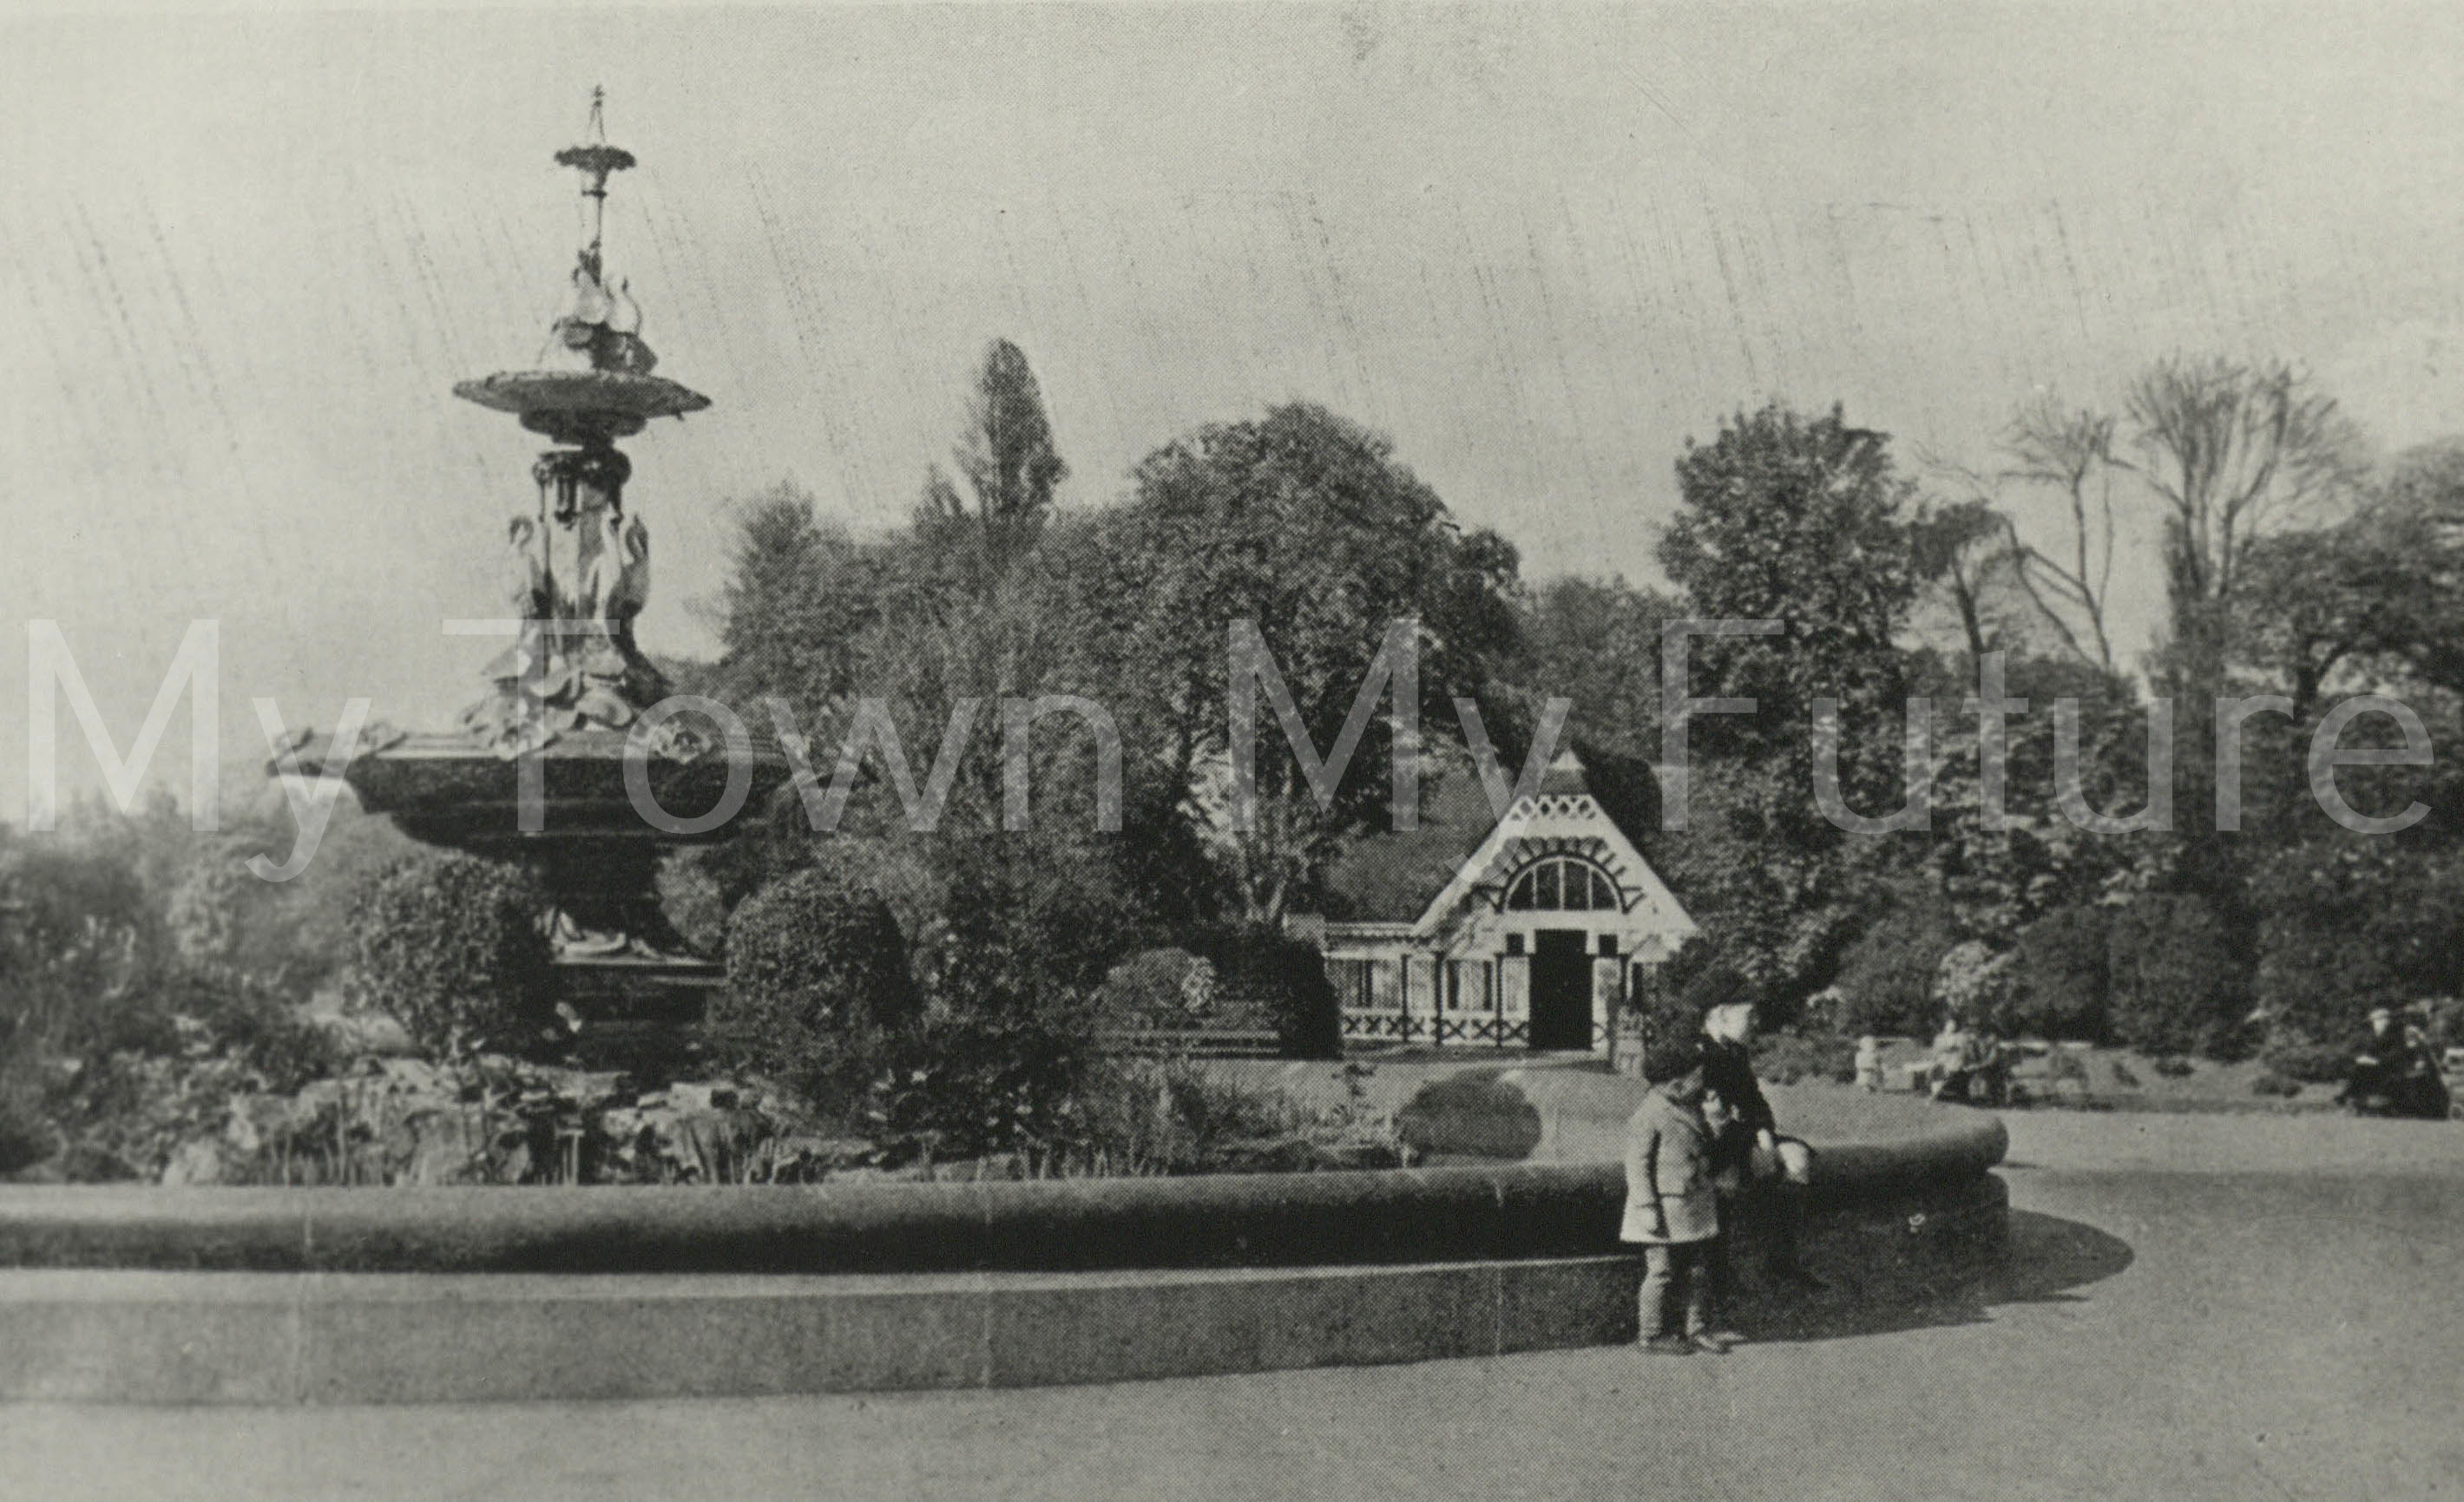 Albert Park - Fountain which was presented by Joseph Pease Esq. Postcard - No date - Mrs Hunter - Dept. of Planning - Cleveland County Council